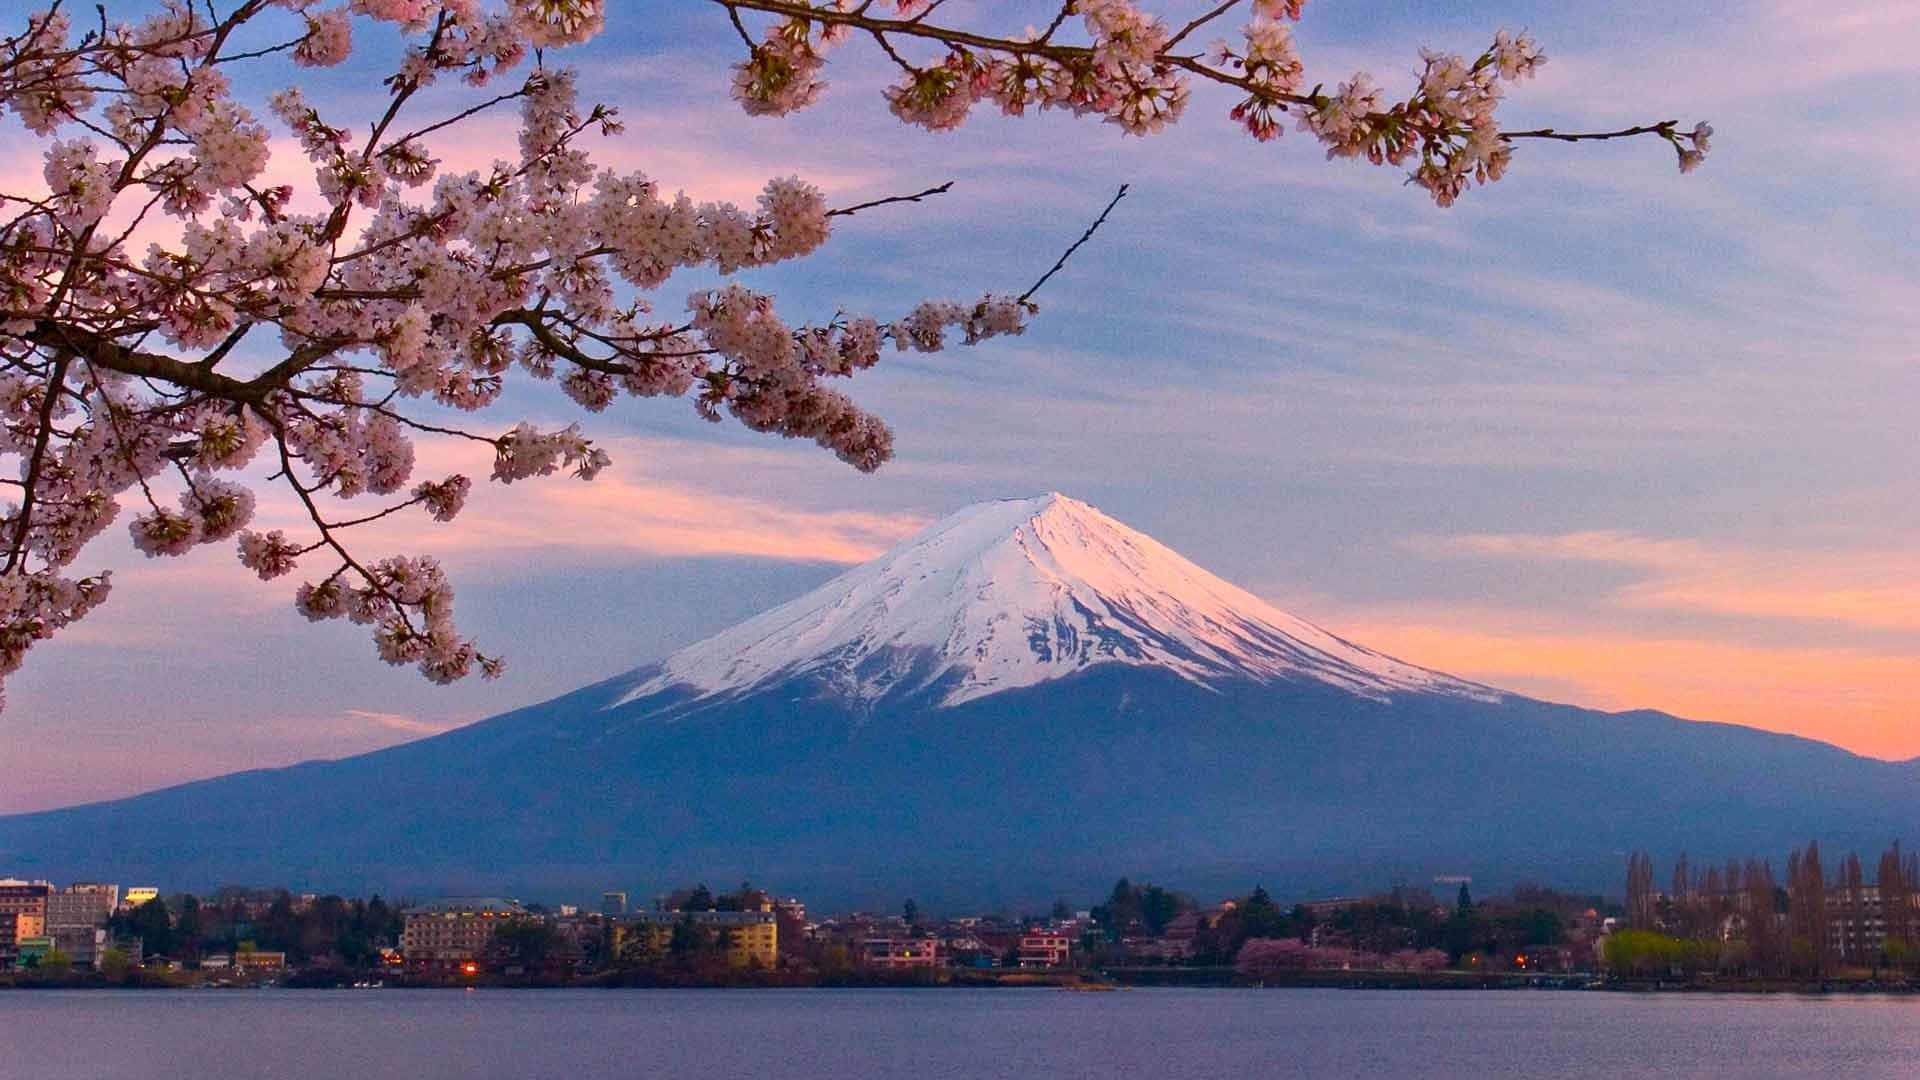 A tranquil sunrise over Mount Fuji in Japan